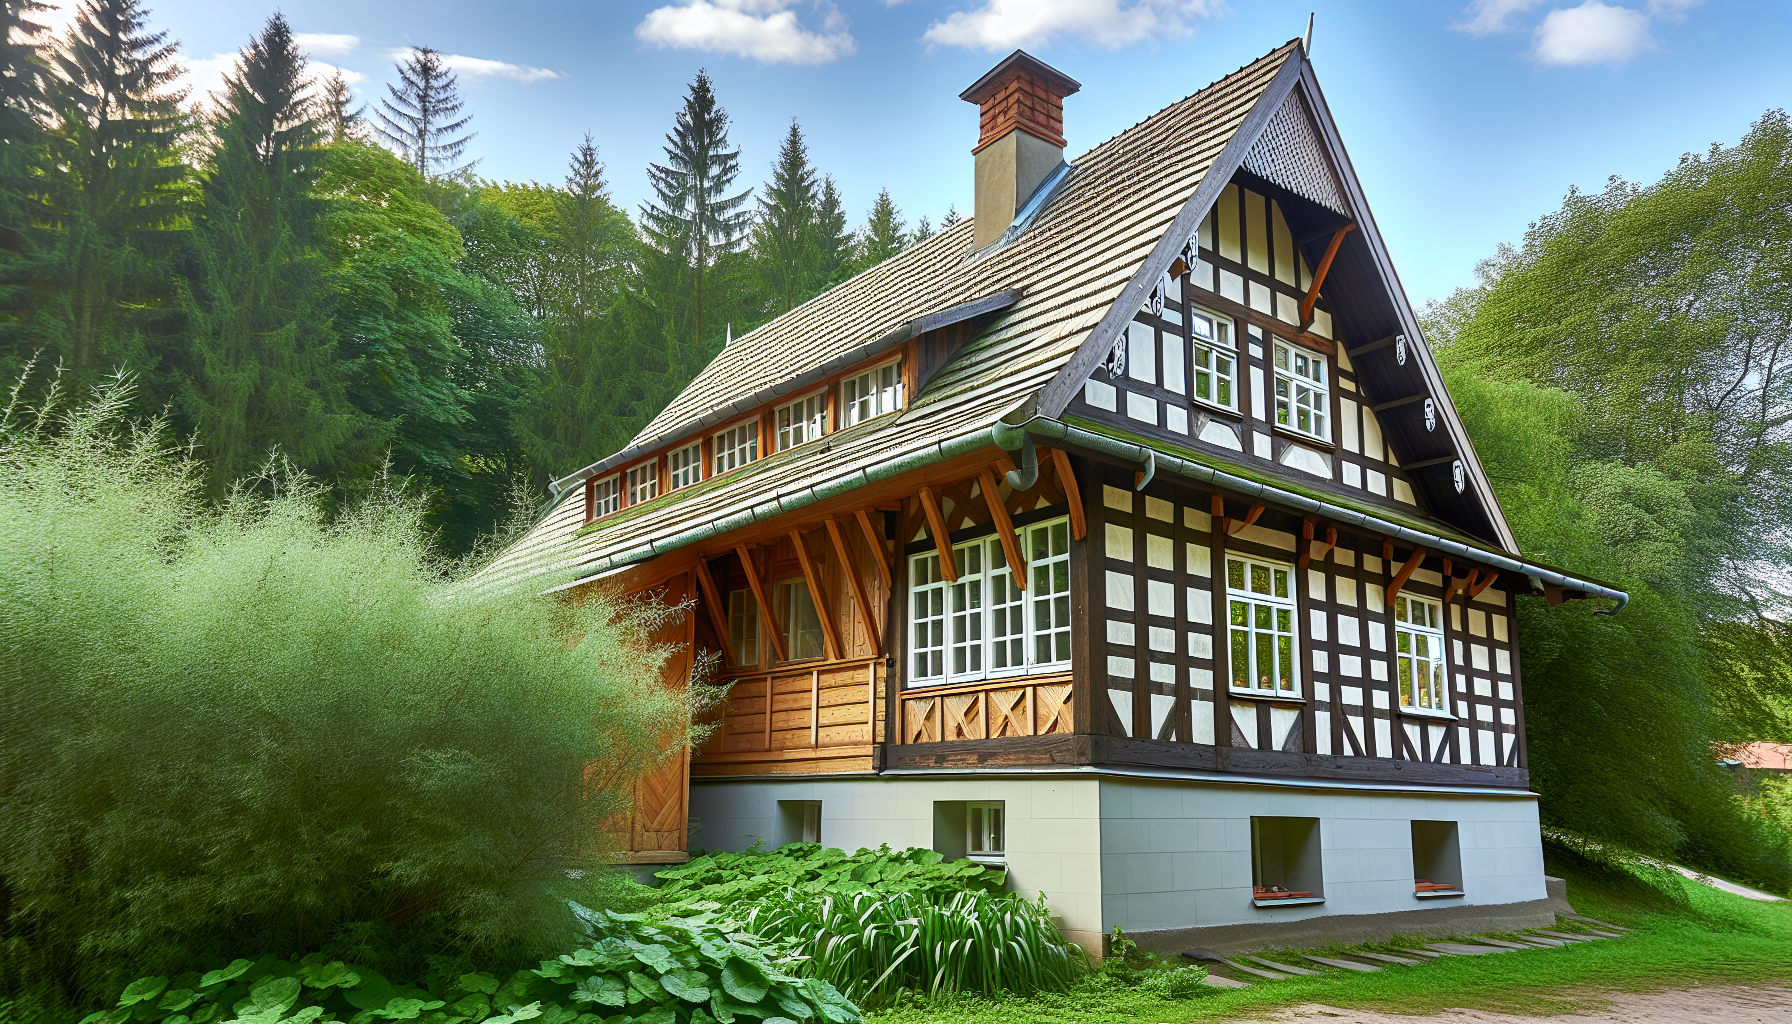 Traditional timber frame house with classic design elements and pitched roof